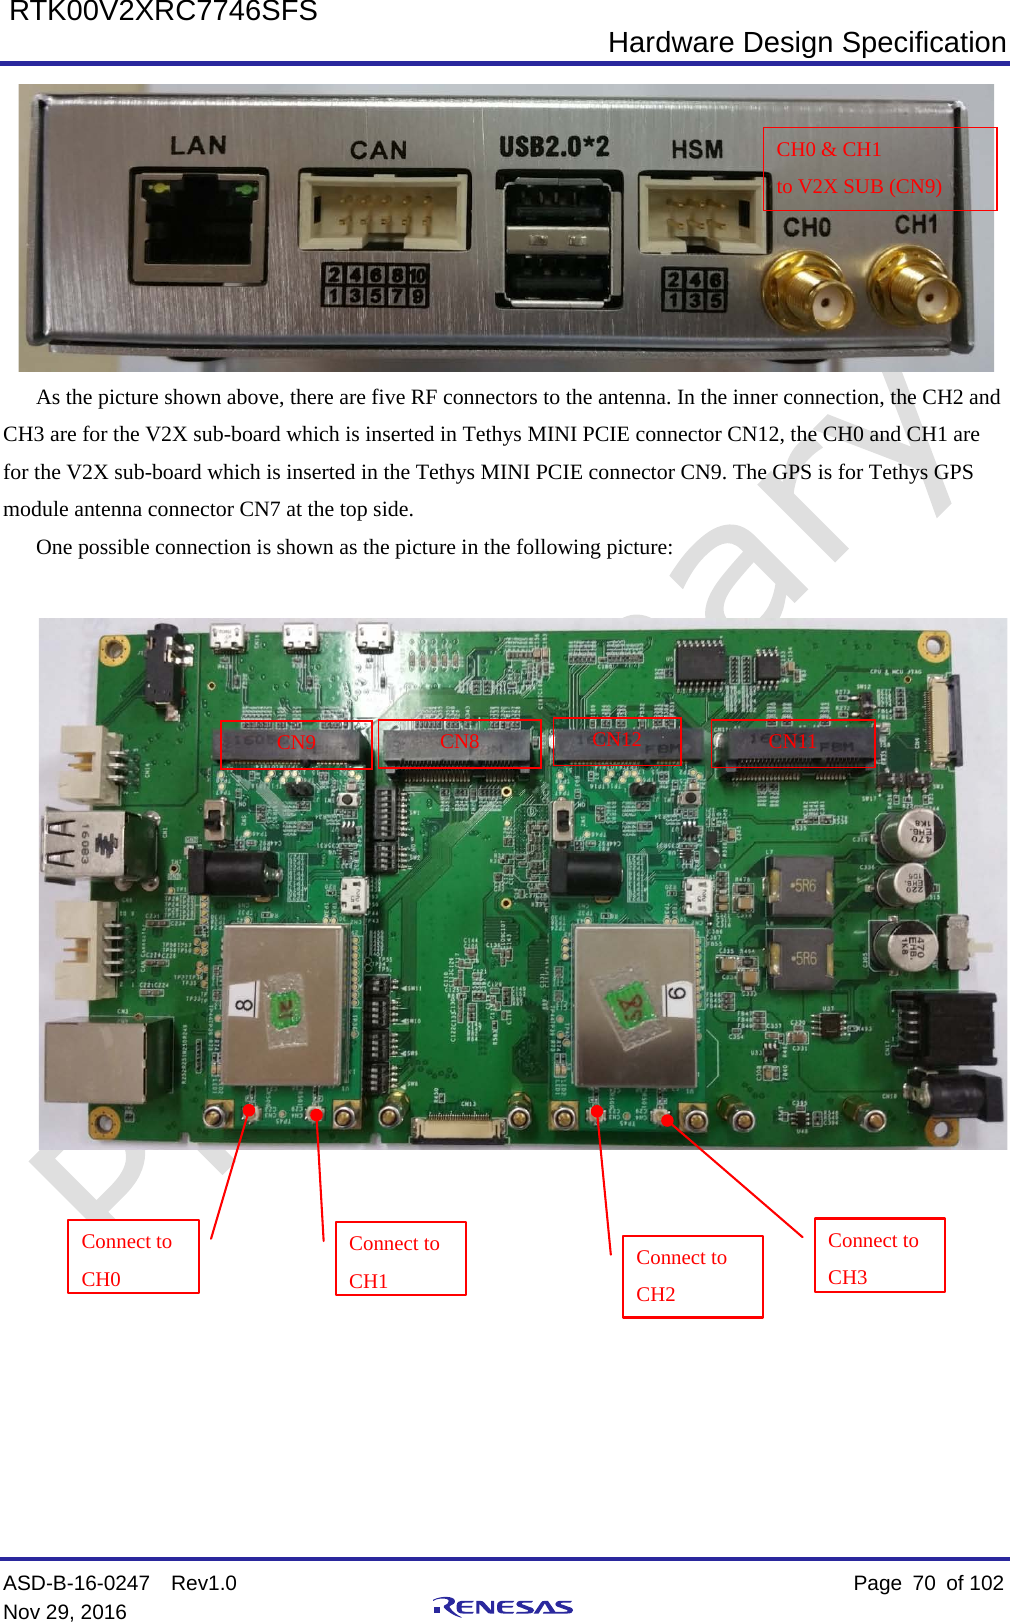  Hardware Design Specification ASD-B-16-0247  Rev1.0    Page  70 of 102 Nov 29, 2016     RTK00V2XRC7746SFS  As the picture shown above, there are five RF connectors to the antenna. In the inner connection, the CH2 and CH3 are for the V2X sub-board which is inserted in Tethys MINI PCIE connector CN12, the CH0 and CH1 are for the V2X sub-board which is inserted in the Tethys MINI PCIE connector CN9. The GPS is for Tethys GPS module antenna connector CN7 at the top side. One possible connection is shown as the picture in the following picture:           CH0 &amp; CH1                 to V2X SUB (CN9)       CN12 CN8 CN9 Connect to CH0 Connect to CH1 Connect to CH2 Connect to CH3 CN11 